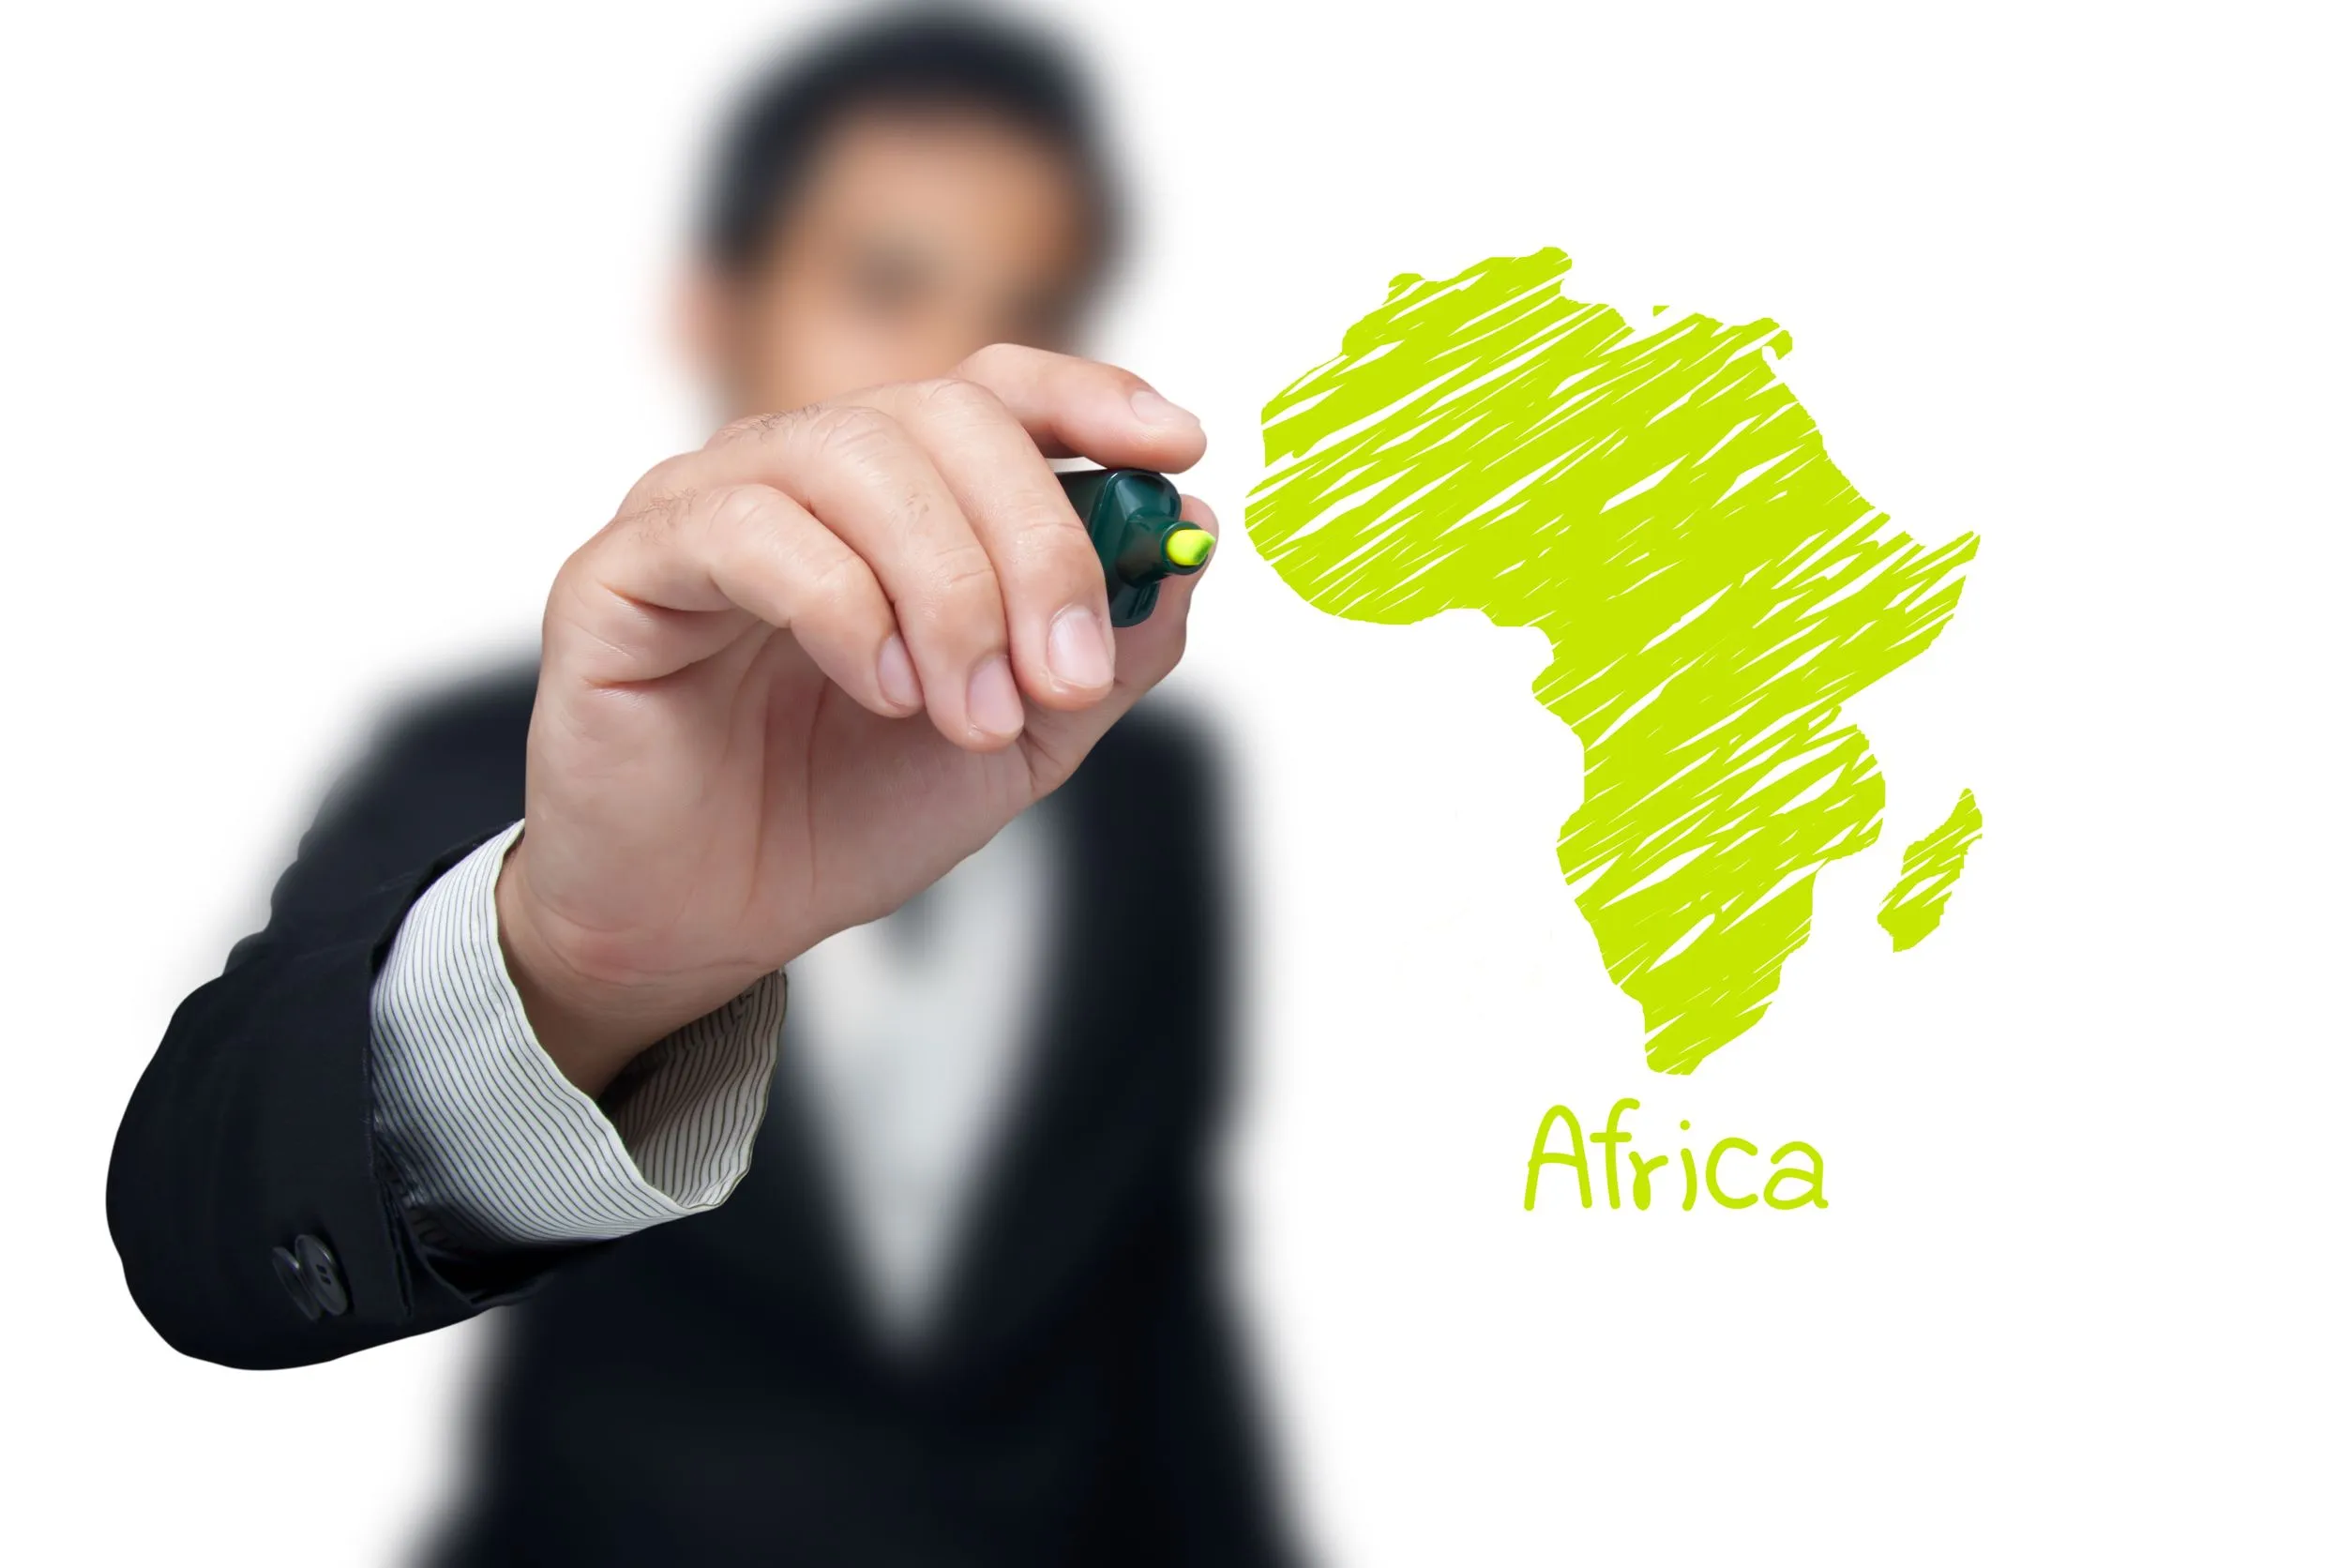 pro-business policies in Africa